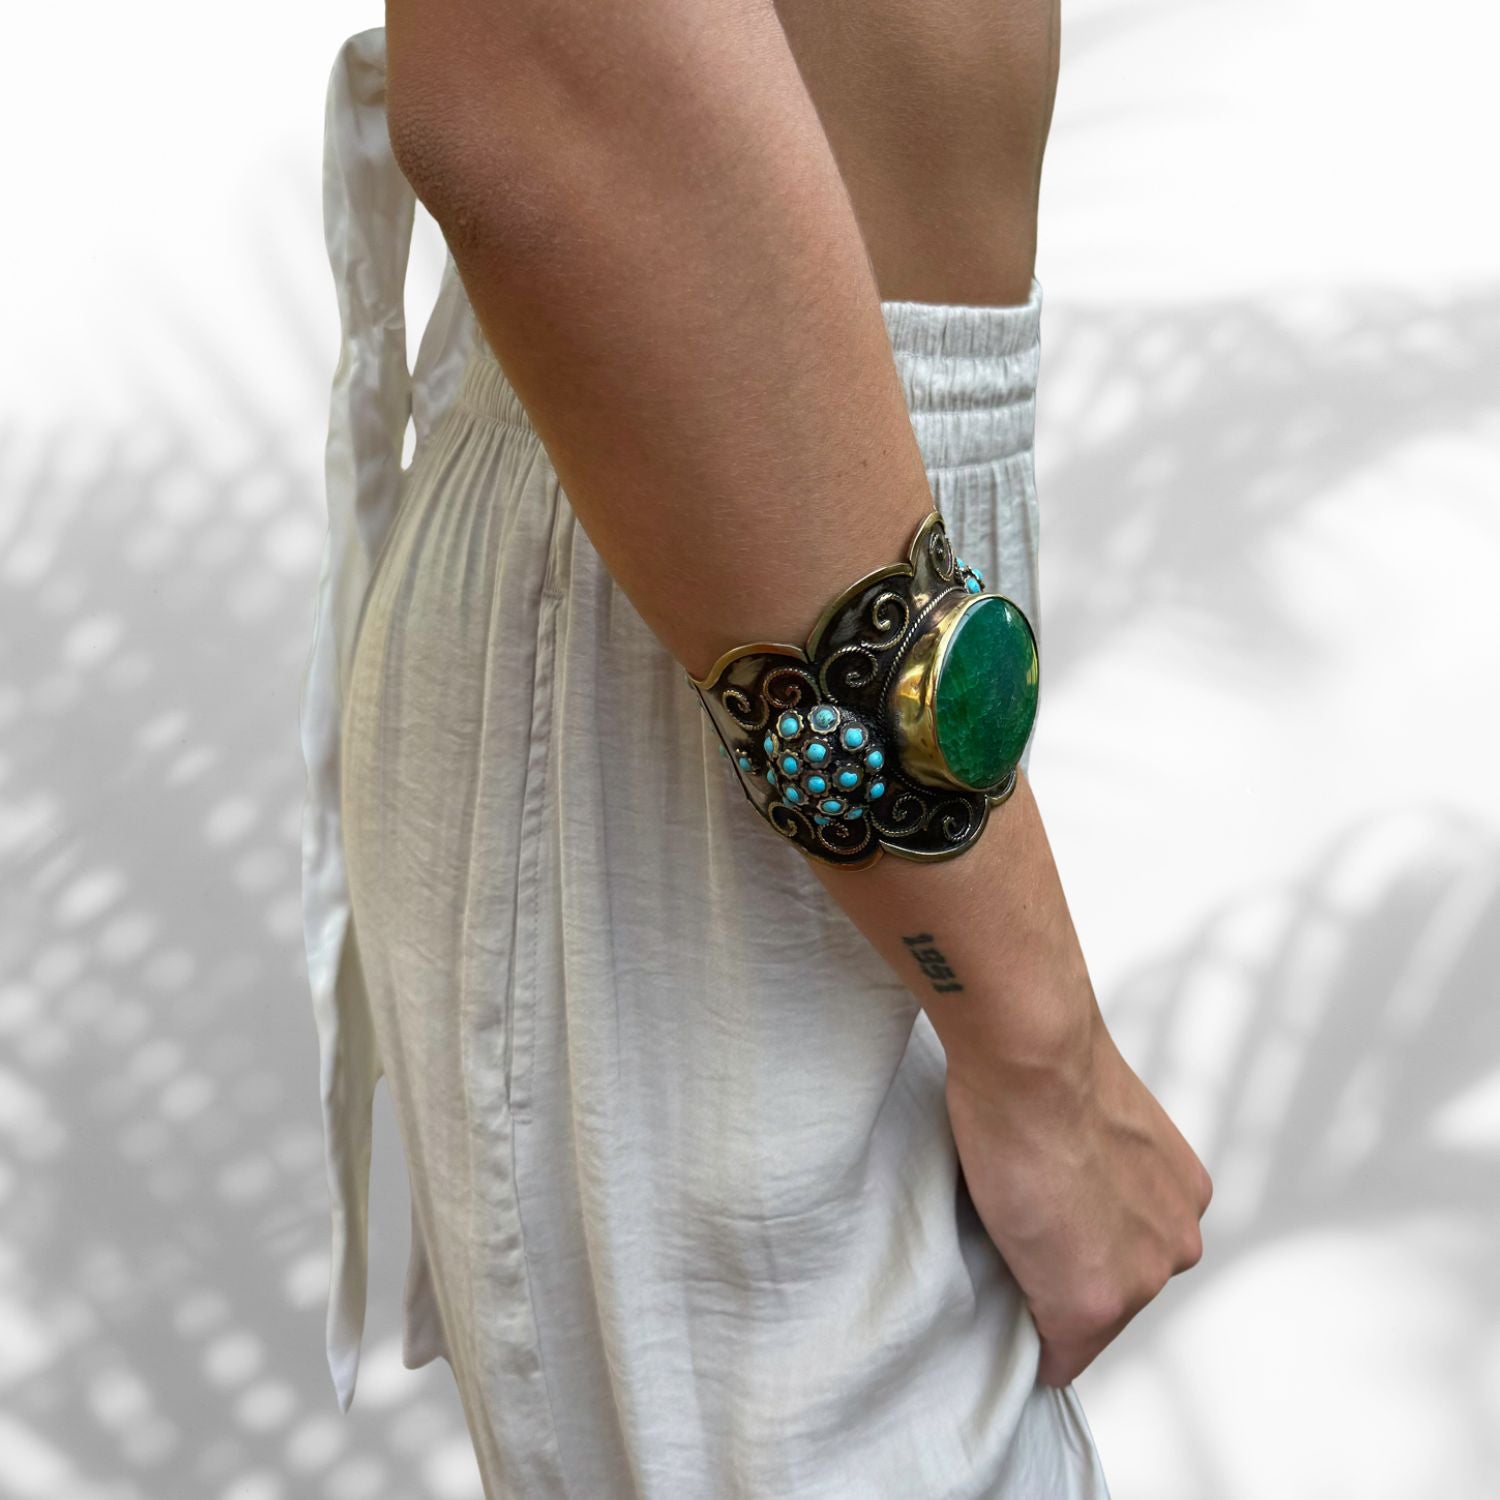 Model Wearing turquoise and jade gemstone bracelet with gold-plated designs